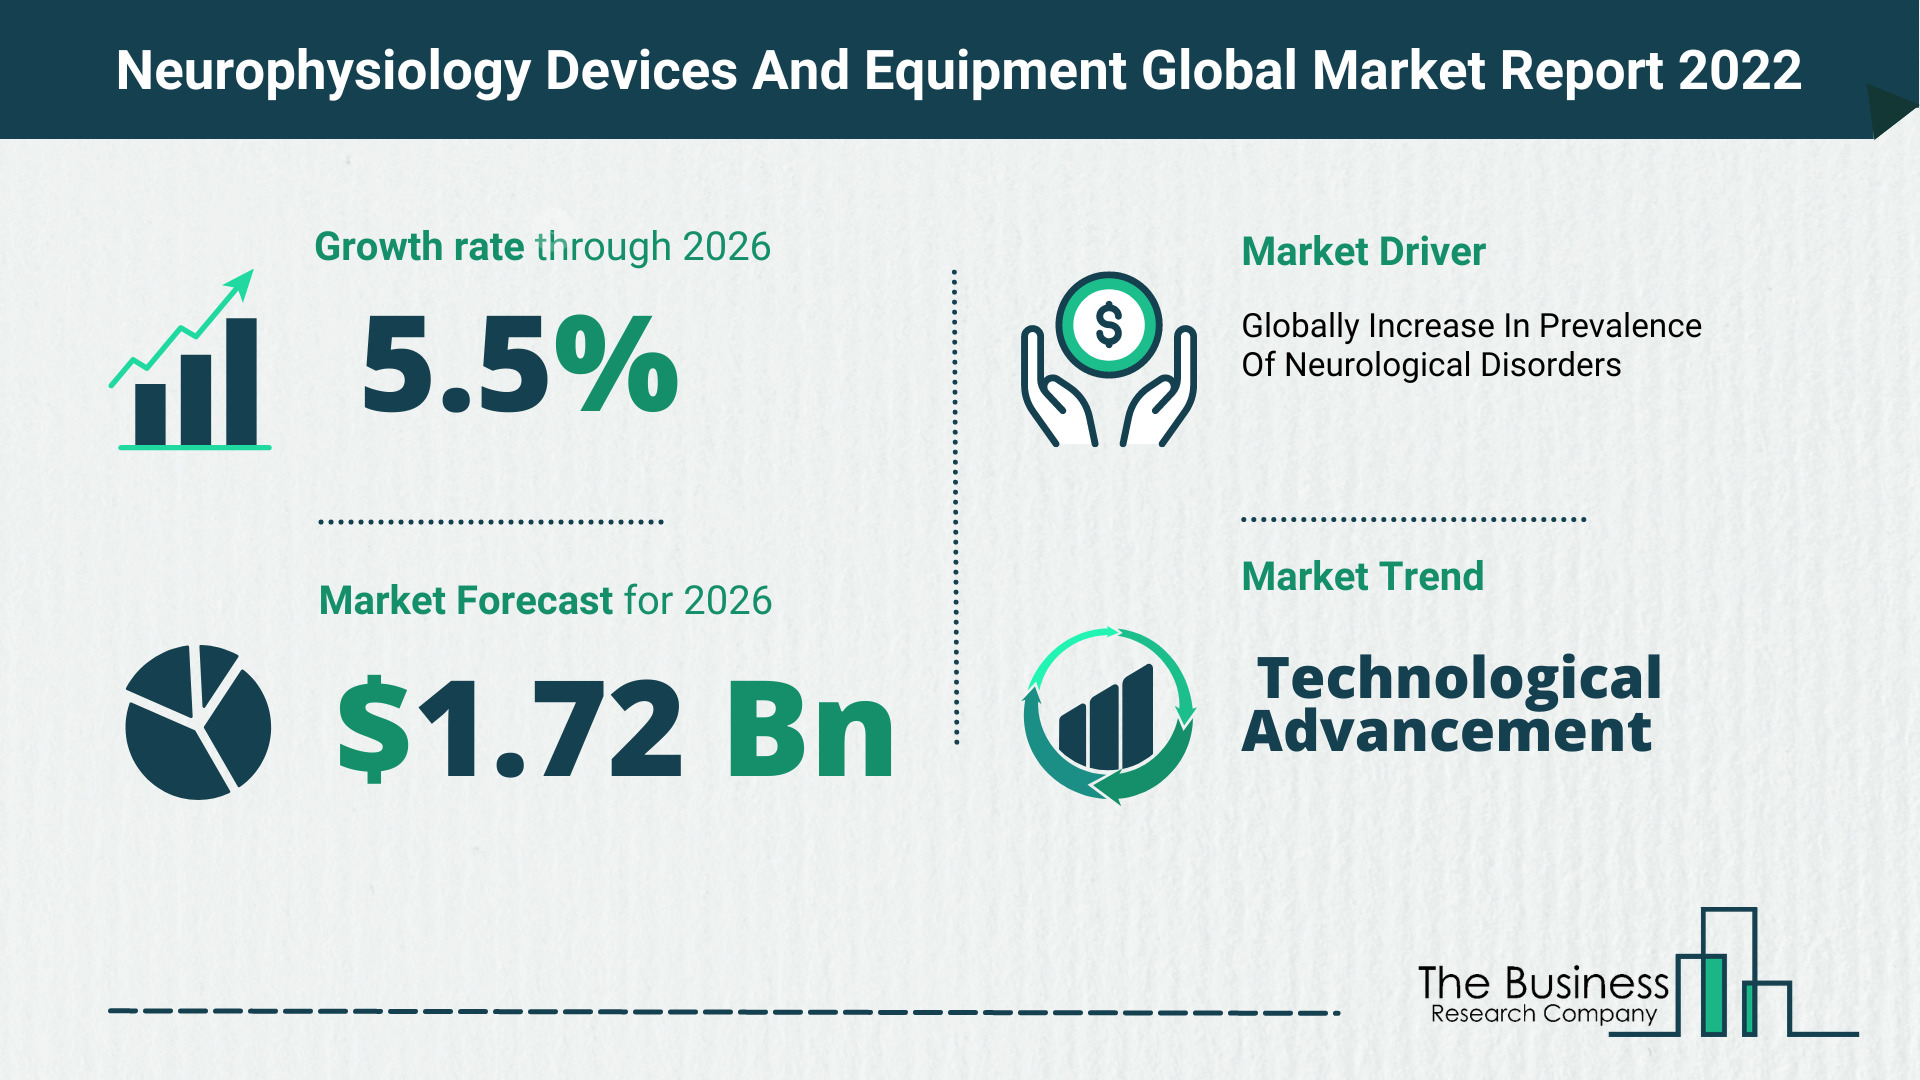 Global Neurophysiology Devices And Equipment Market